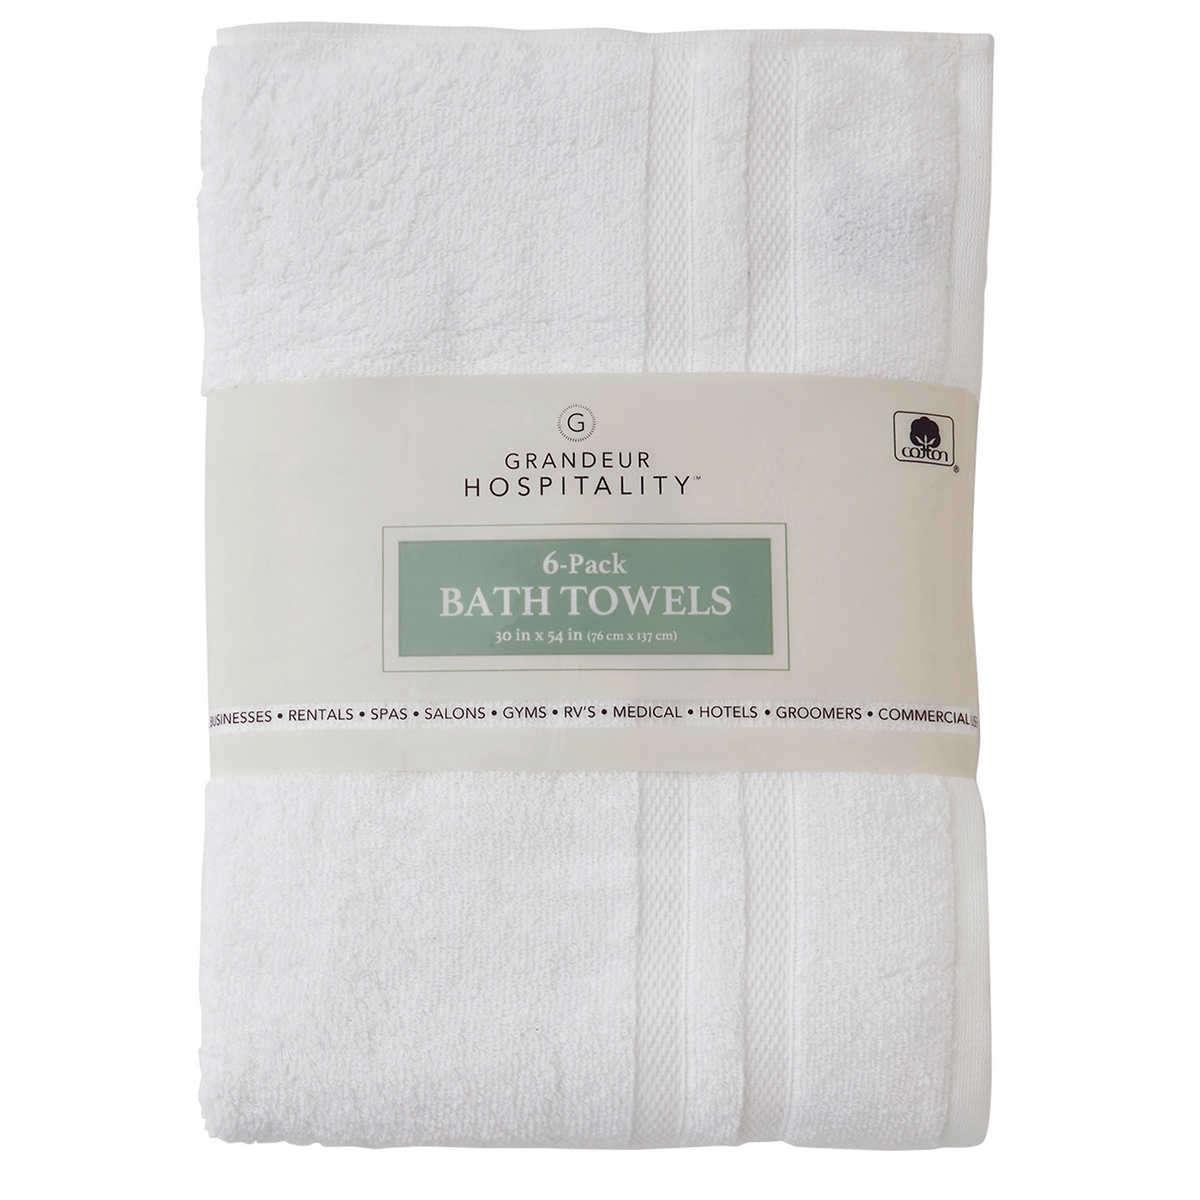 Premium Quality Cotton Bath Towels for Men and Women Extra